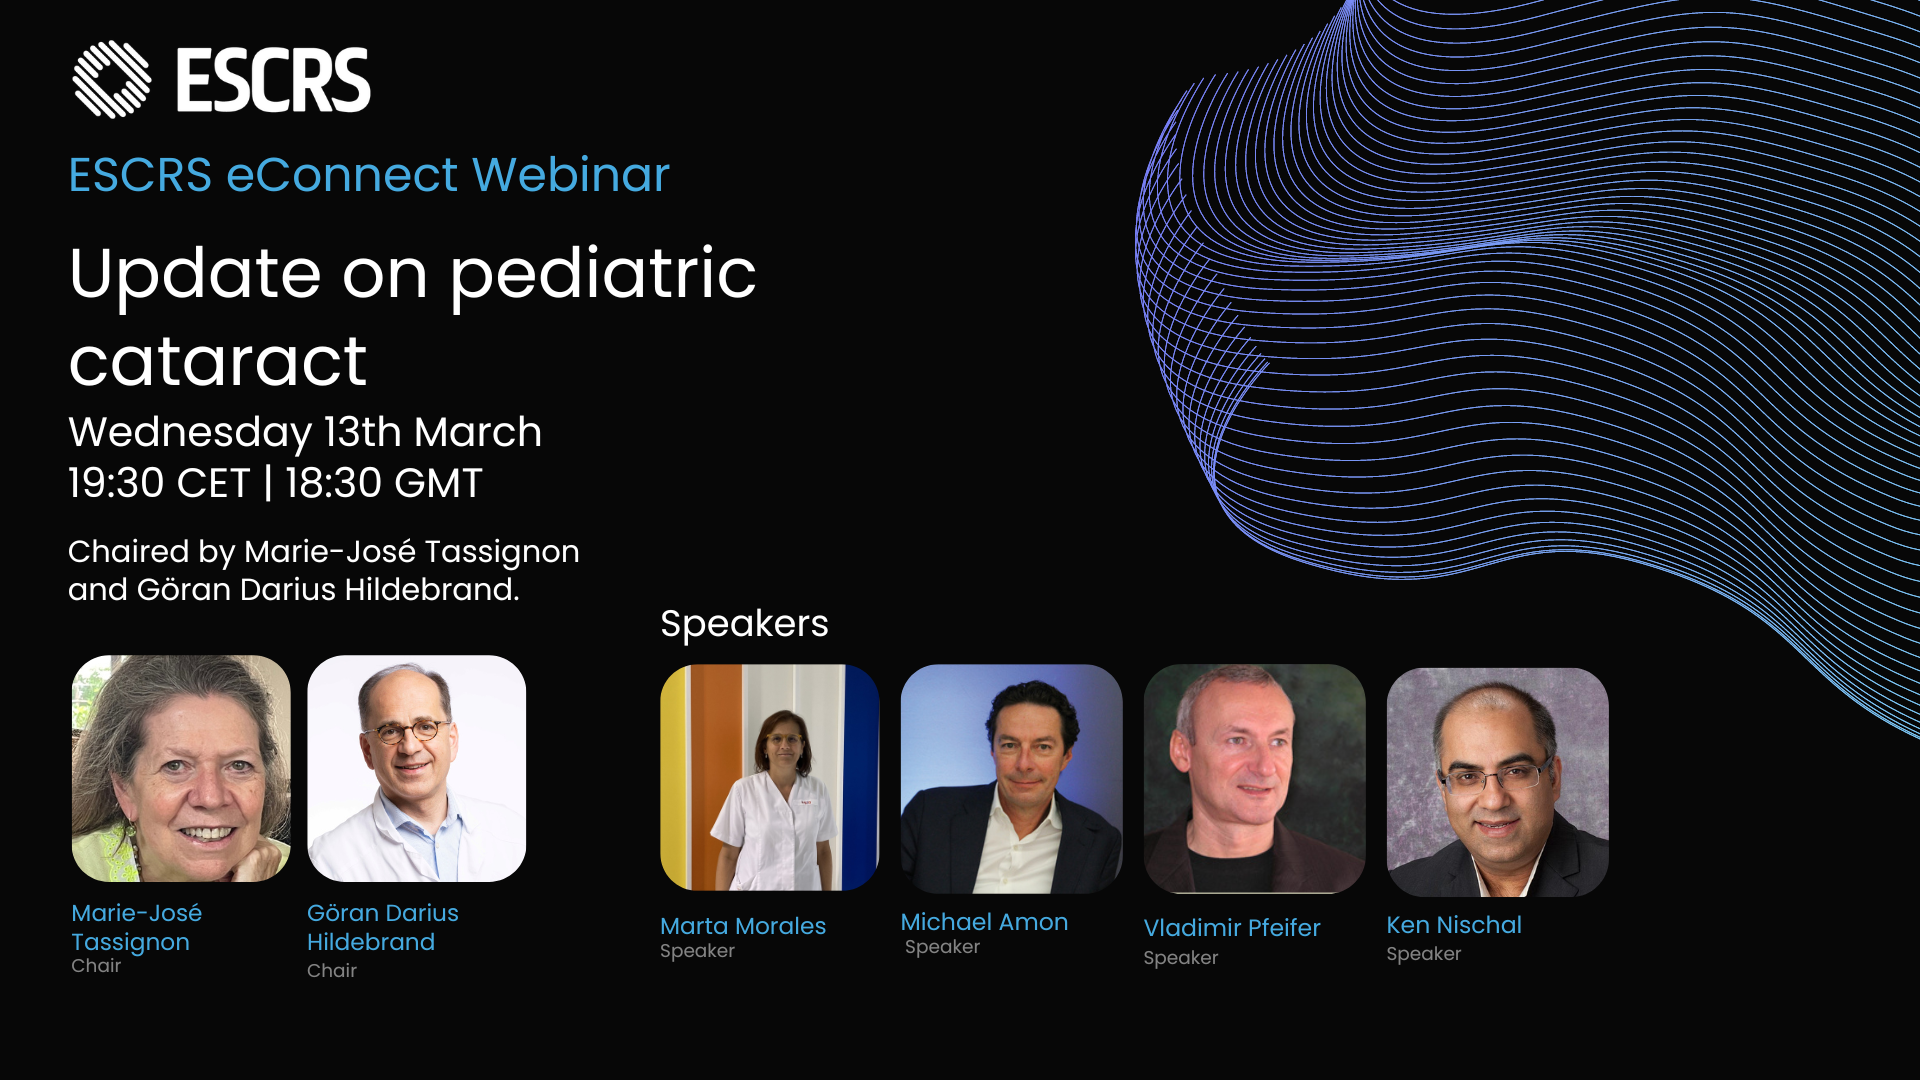 ESCRS eConnect Webinar - Update on pediatric cataract - Podcast 